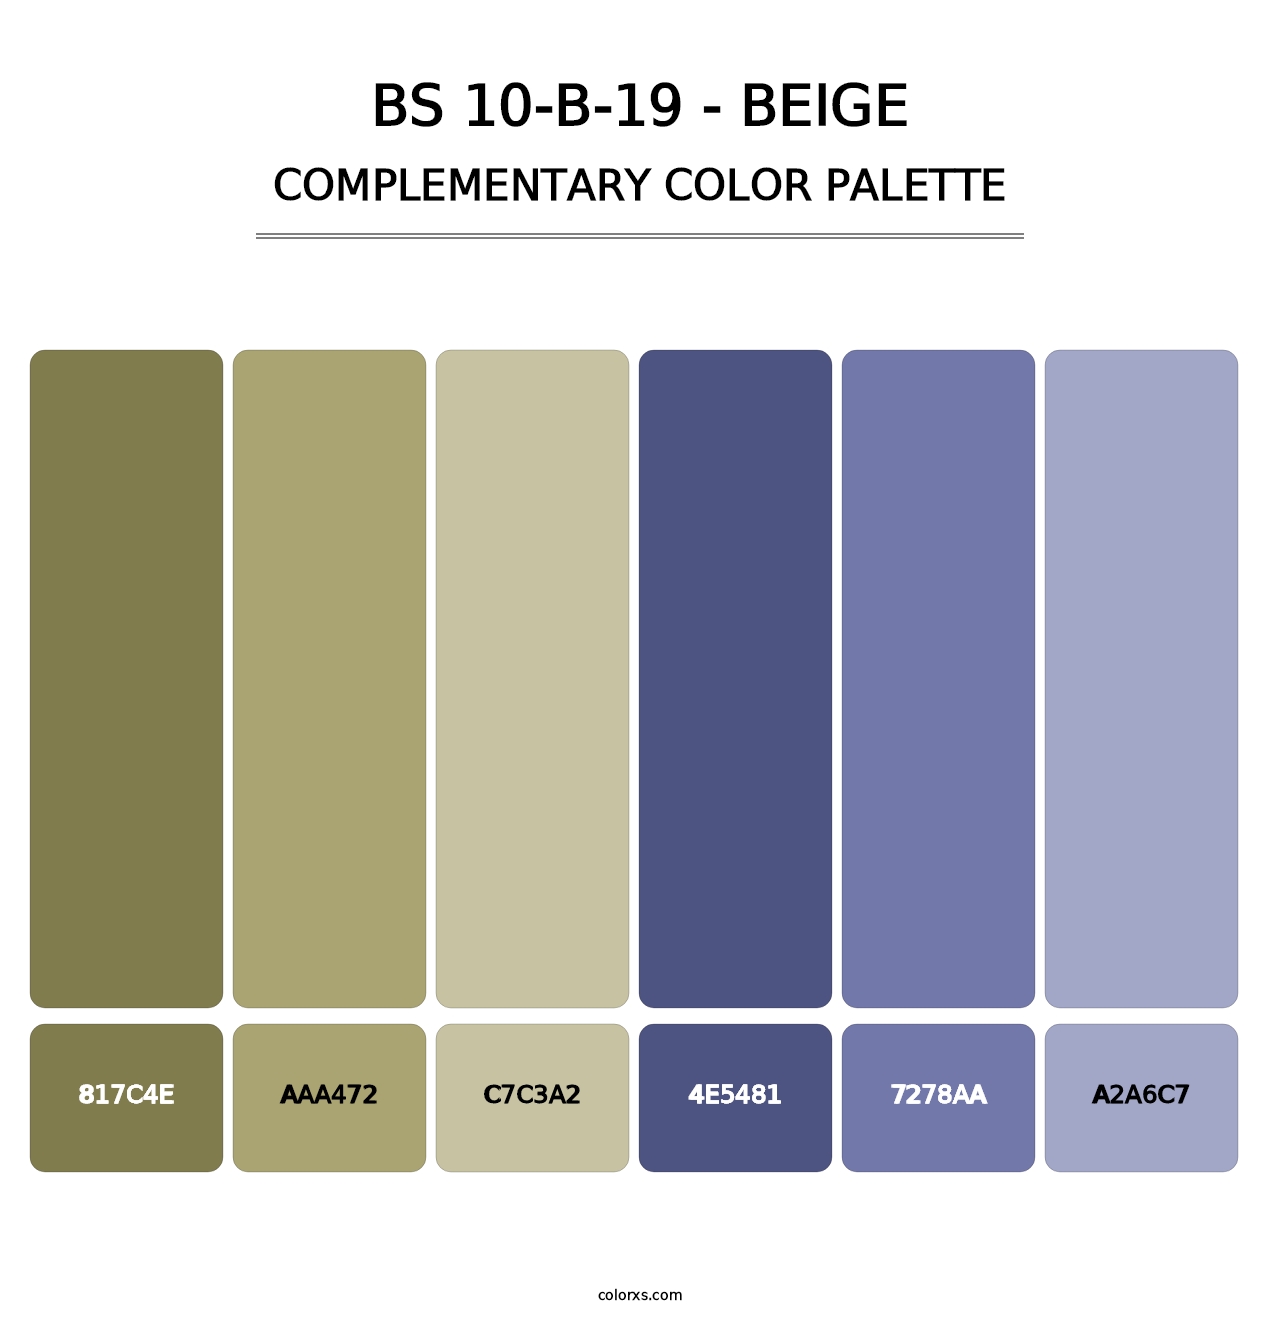 BS 10-B-19 - Beige - Complementary Color Palette